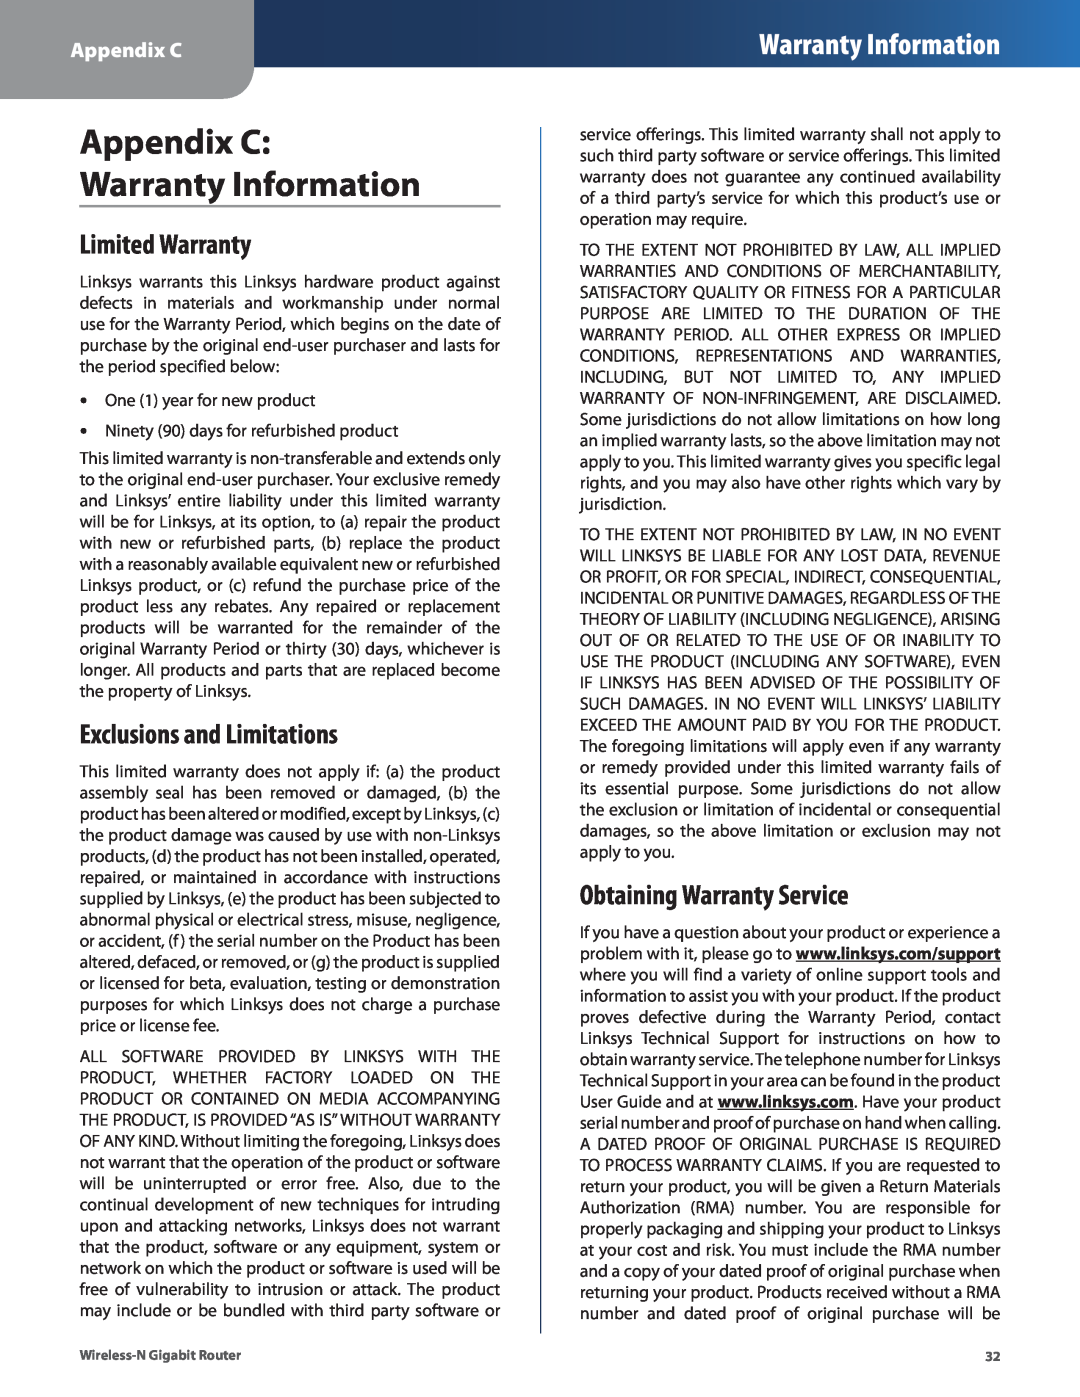 Linksys WRT310N Appendix C Warranty Information, Limited Warranty, Exclusions and Limitations, Obtaining Warranty Service 